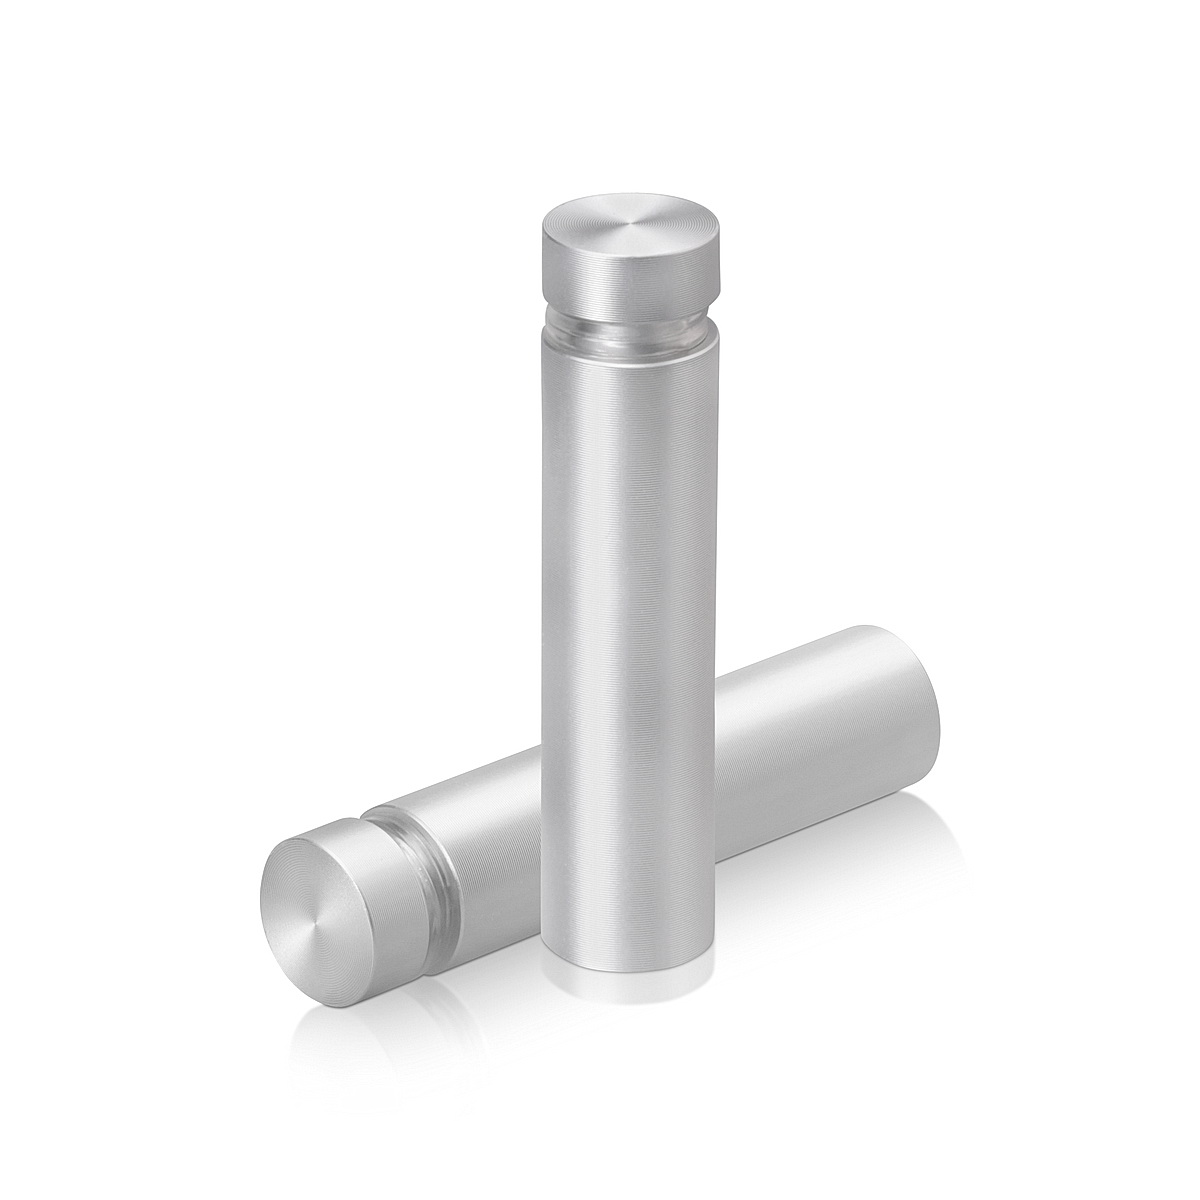 1/2'' Diameter X 1-3/4'' Barrel Length, Aluminum Flat Head Standoffs, Clear Anodized Finish Easy Fasten Standoff (For Inside / Outside use) Tamper Proof Standoff [Required Material Hole Size: 3/8'']